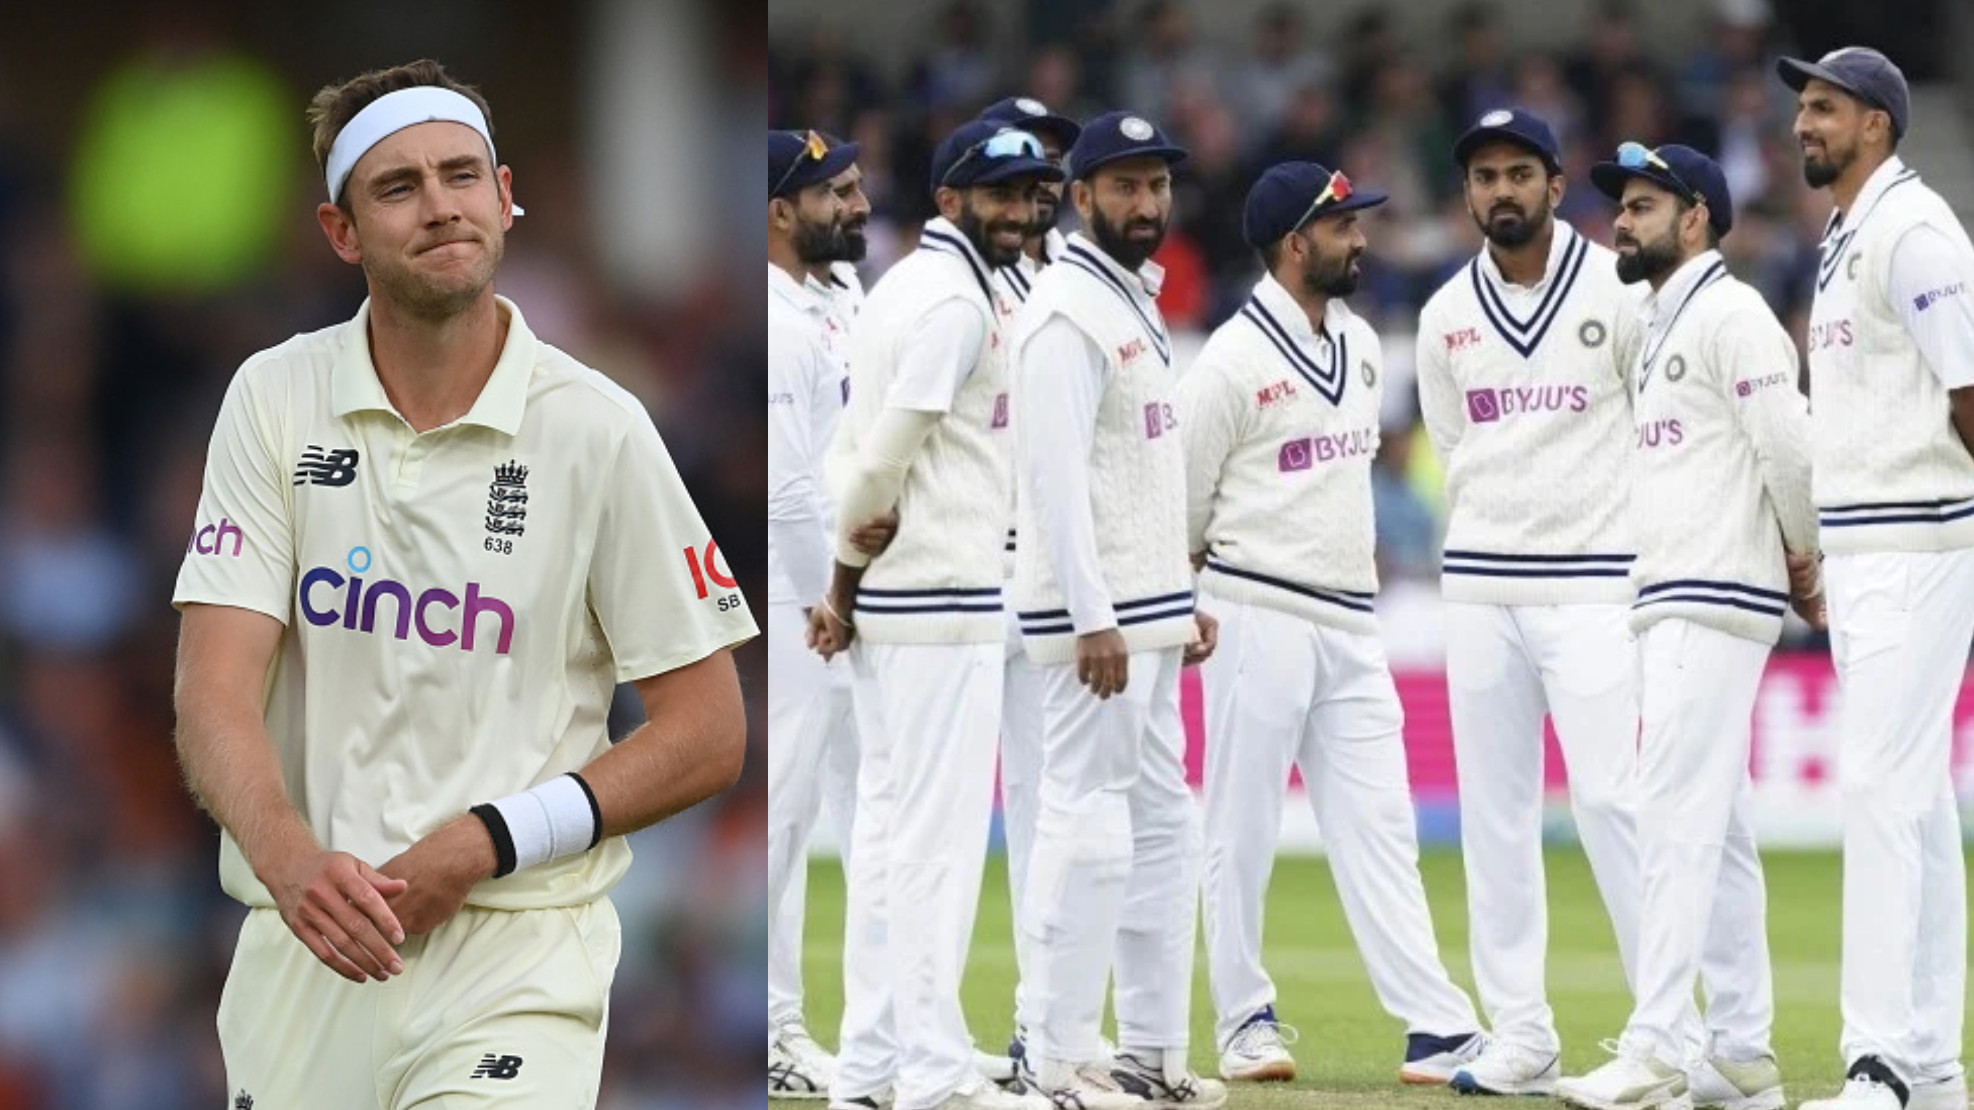 ENG v IND 2021: Stuart Broad sympathizes with Indian cricketers; recalls his time in bio-bubble on India tour